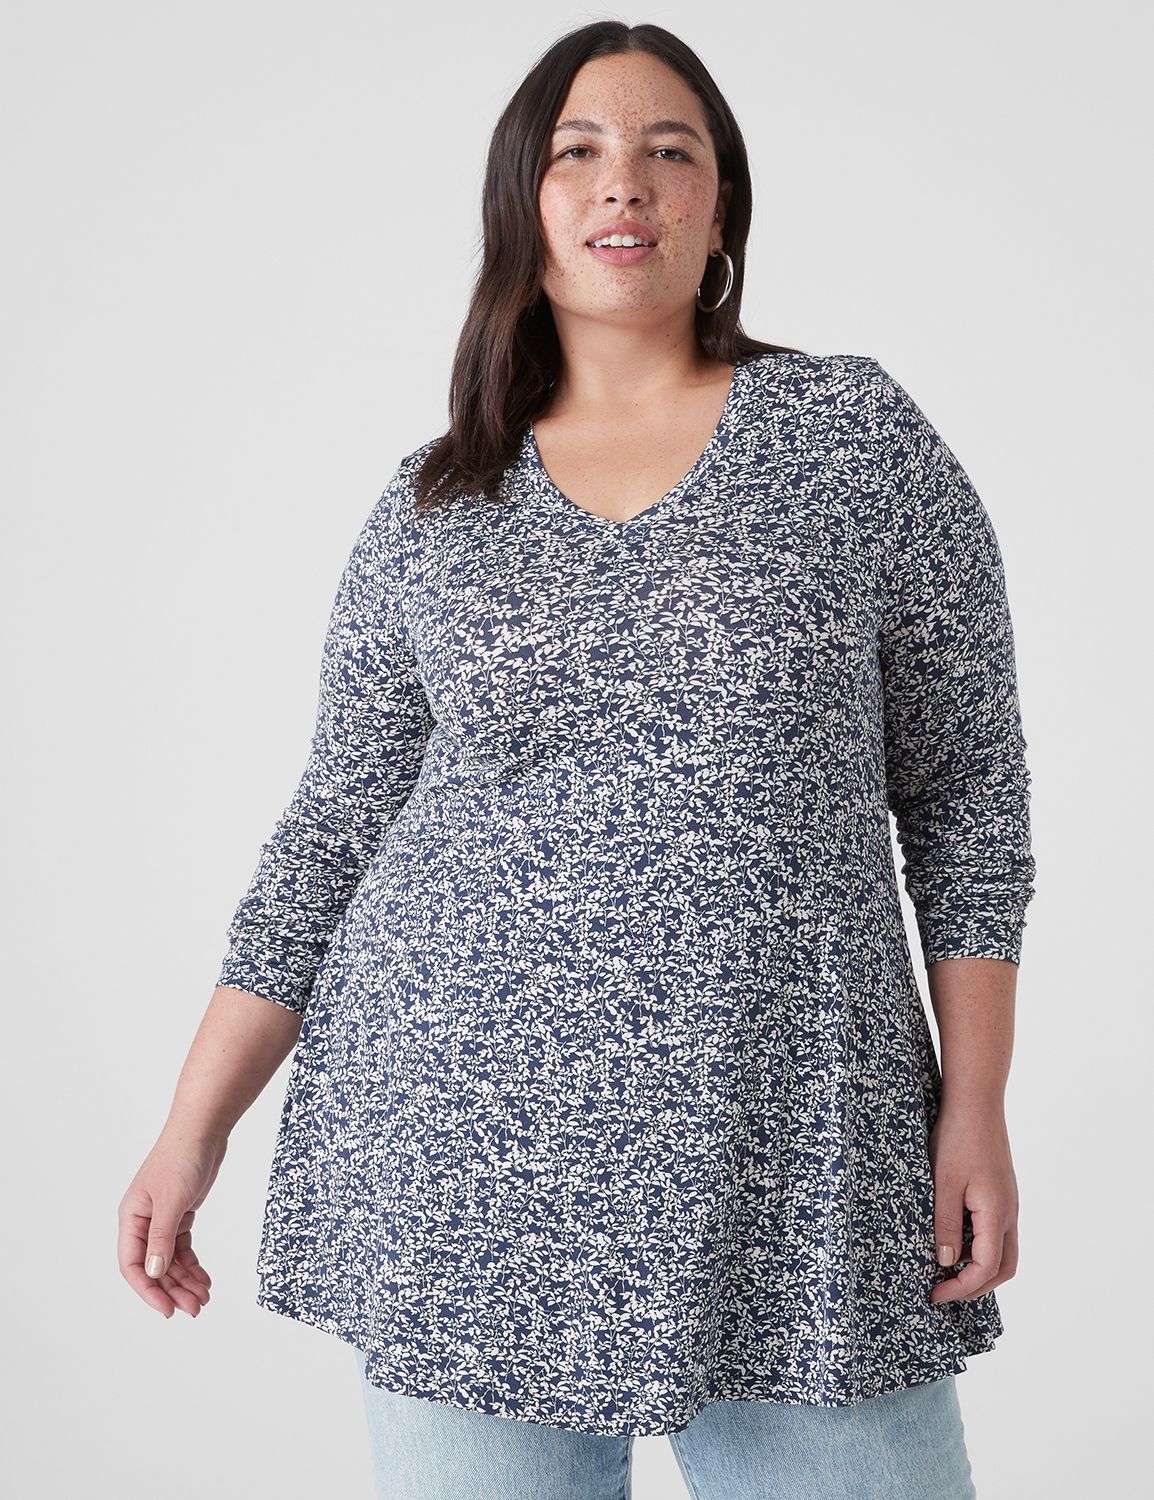 Lane Bryant Swing Long-Sleeve V-Neck Tunic 14/16 Navy Floral Small -  BwcDeals